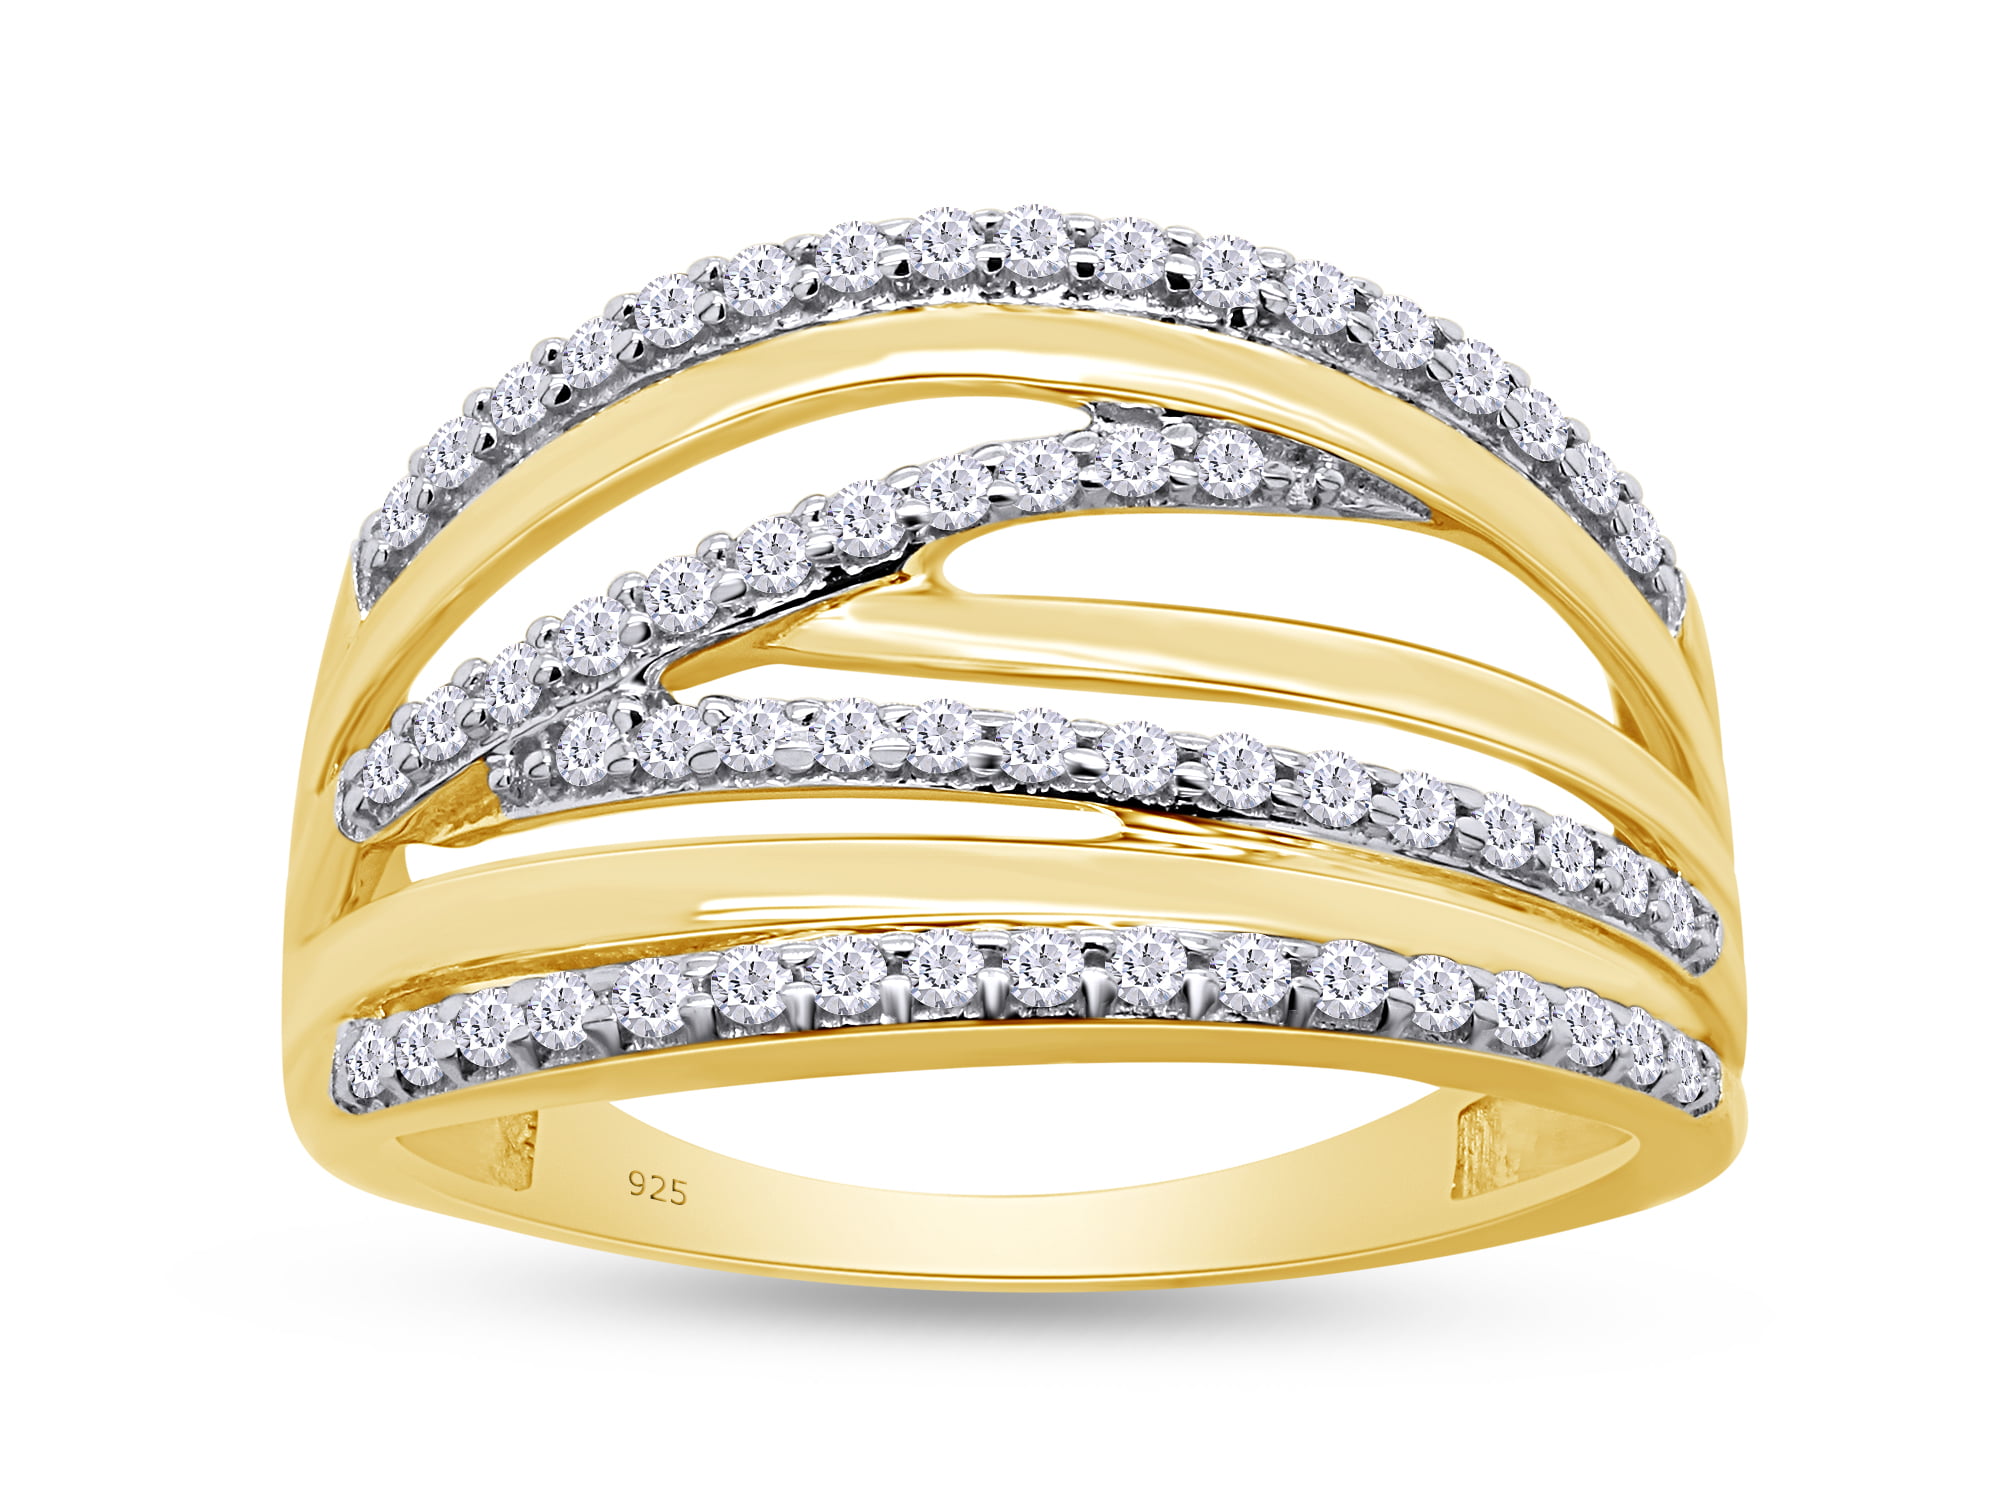 Multi-Cut Cubic Zirconia Eternity Ring in Gold-Plated Sterling Silver